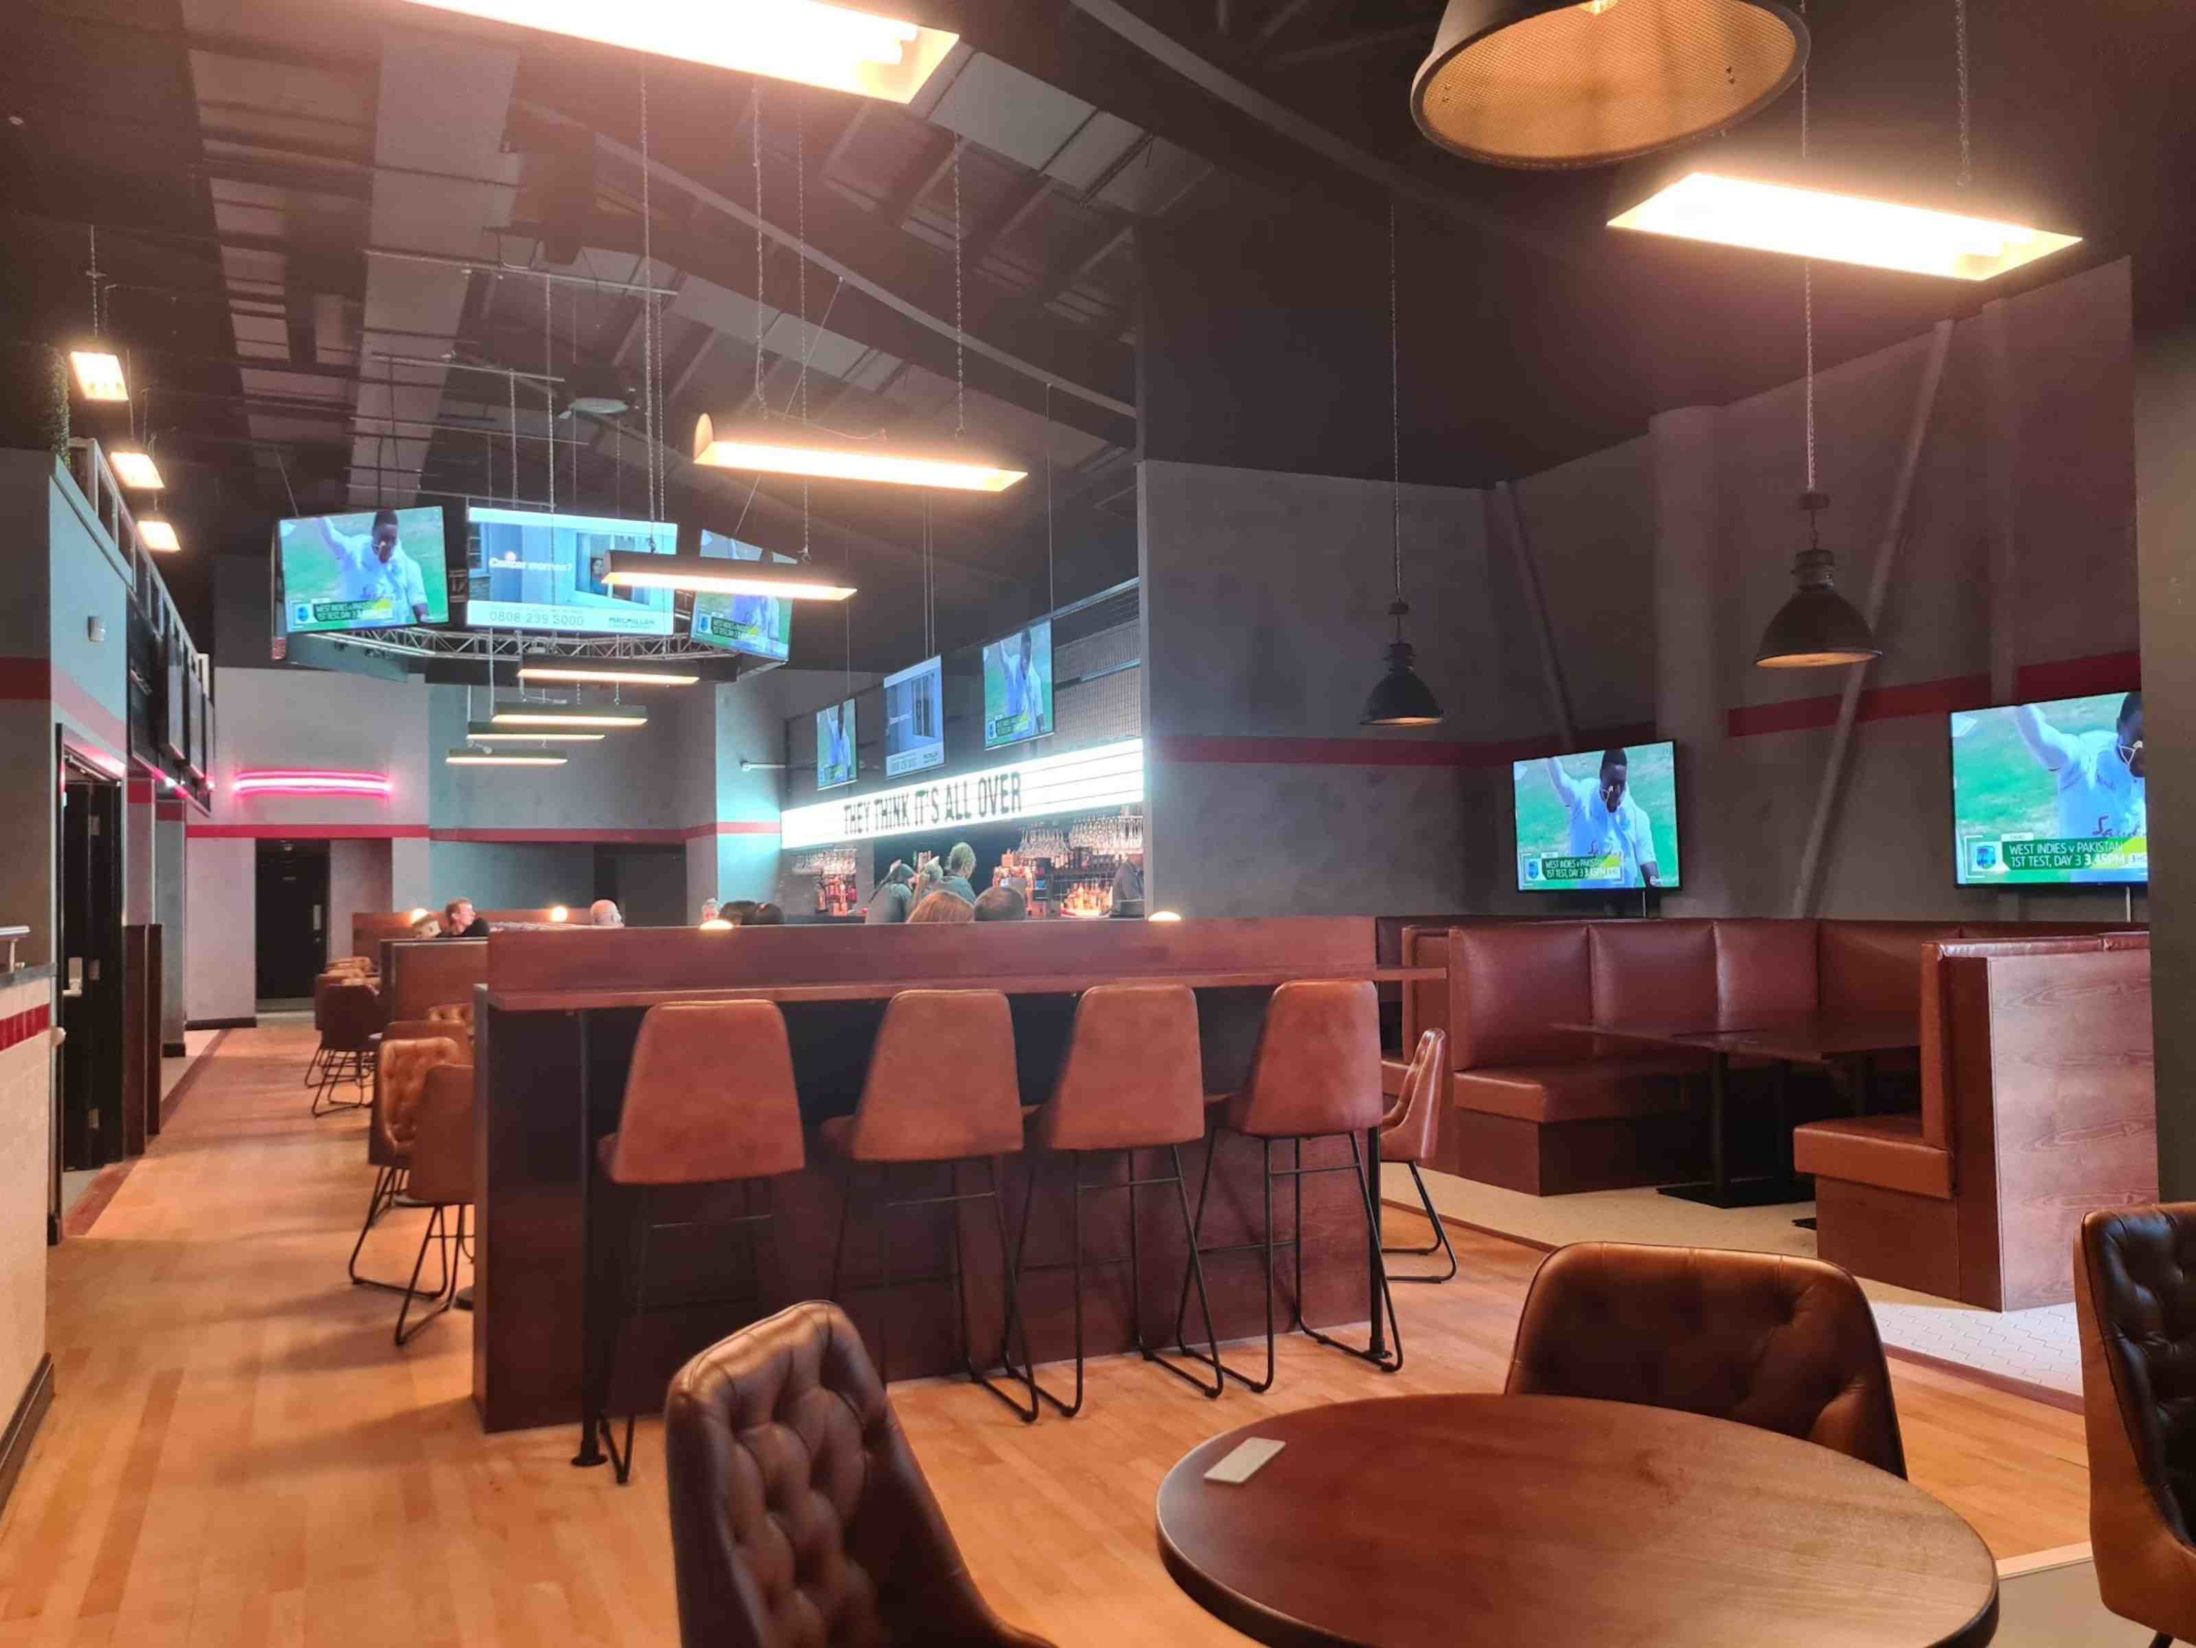 Best Sports Bars in England - Extra Time Sports Bar & Grill Sheffield